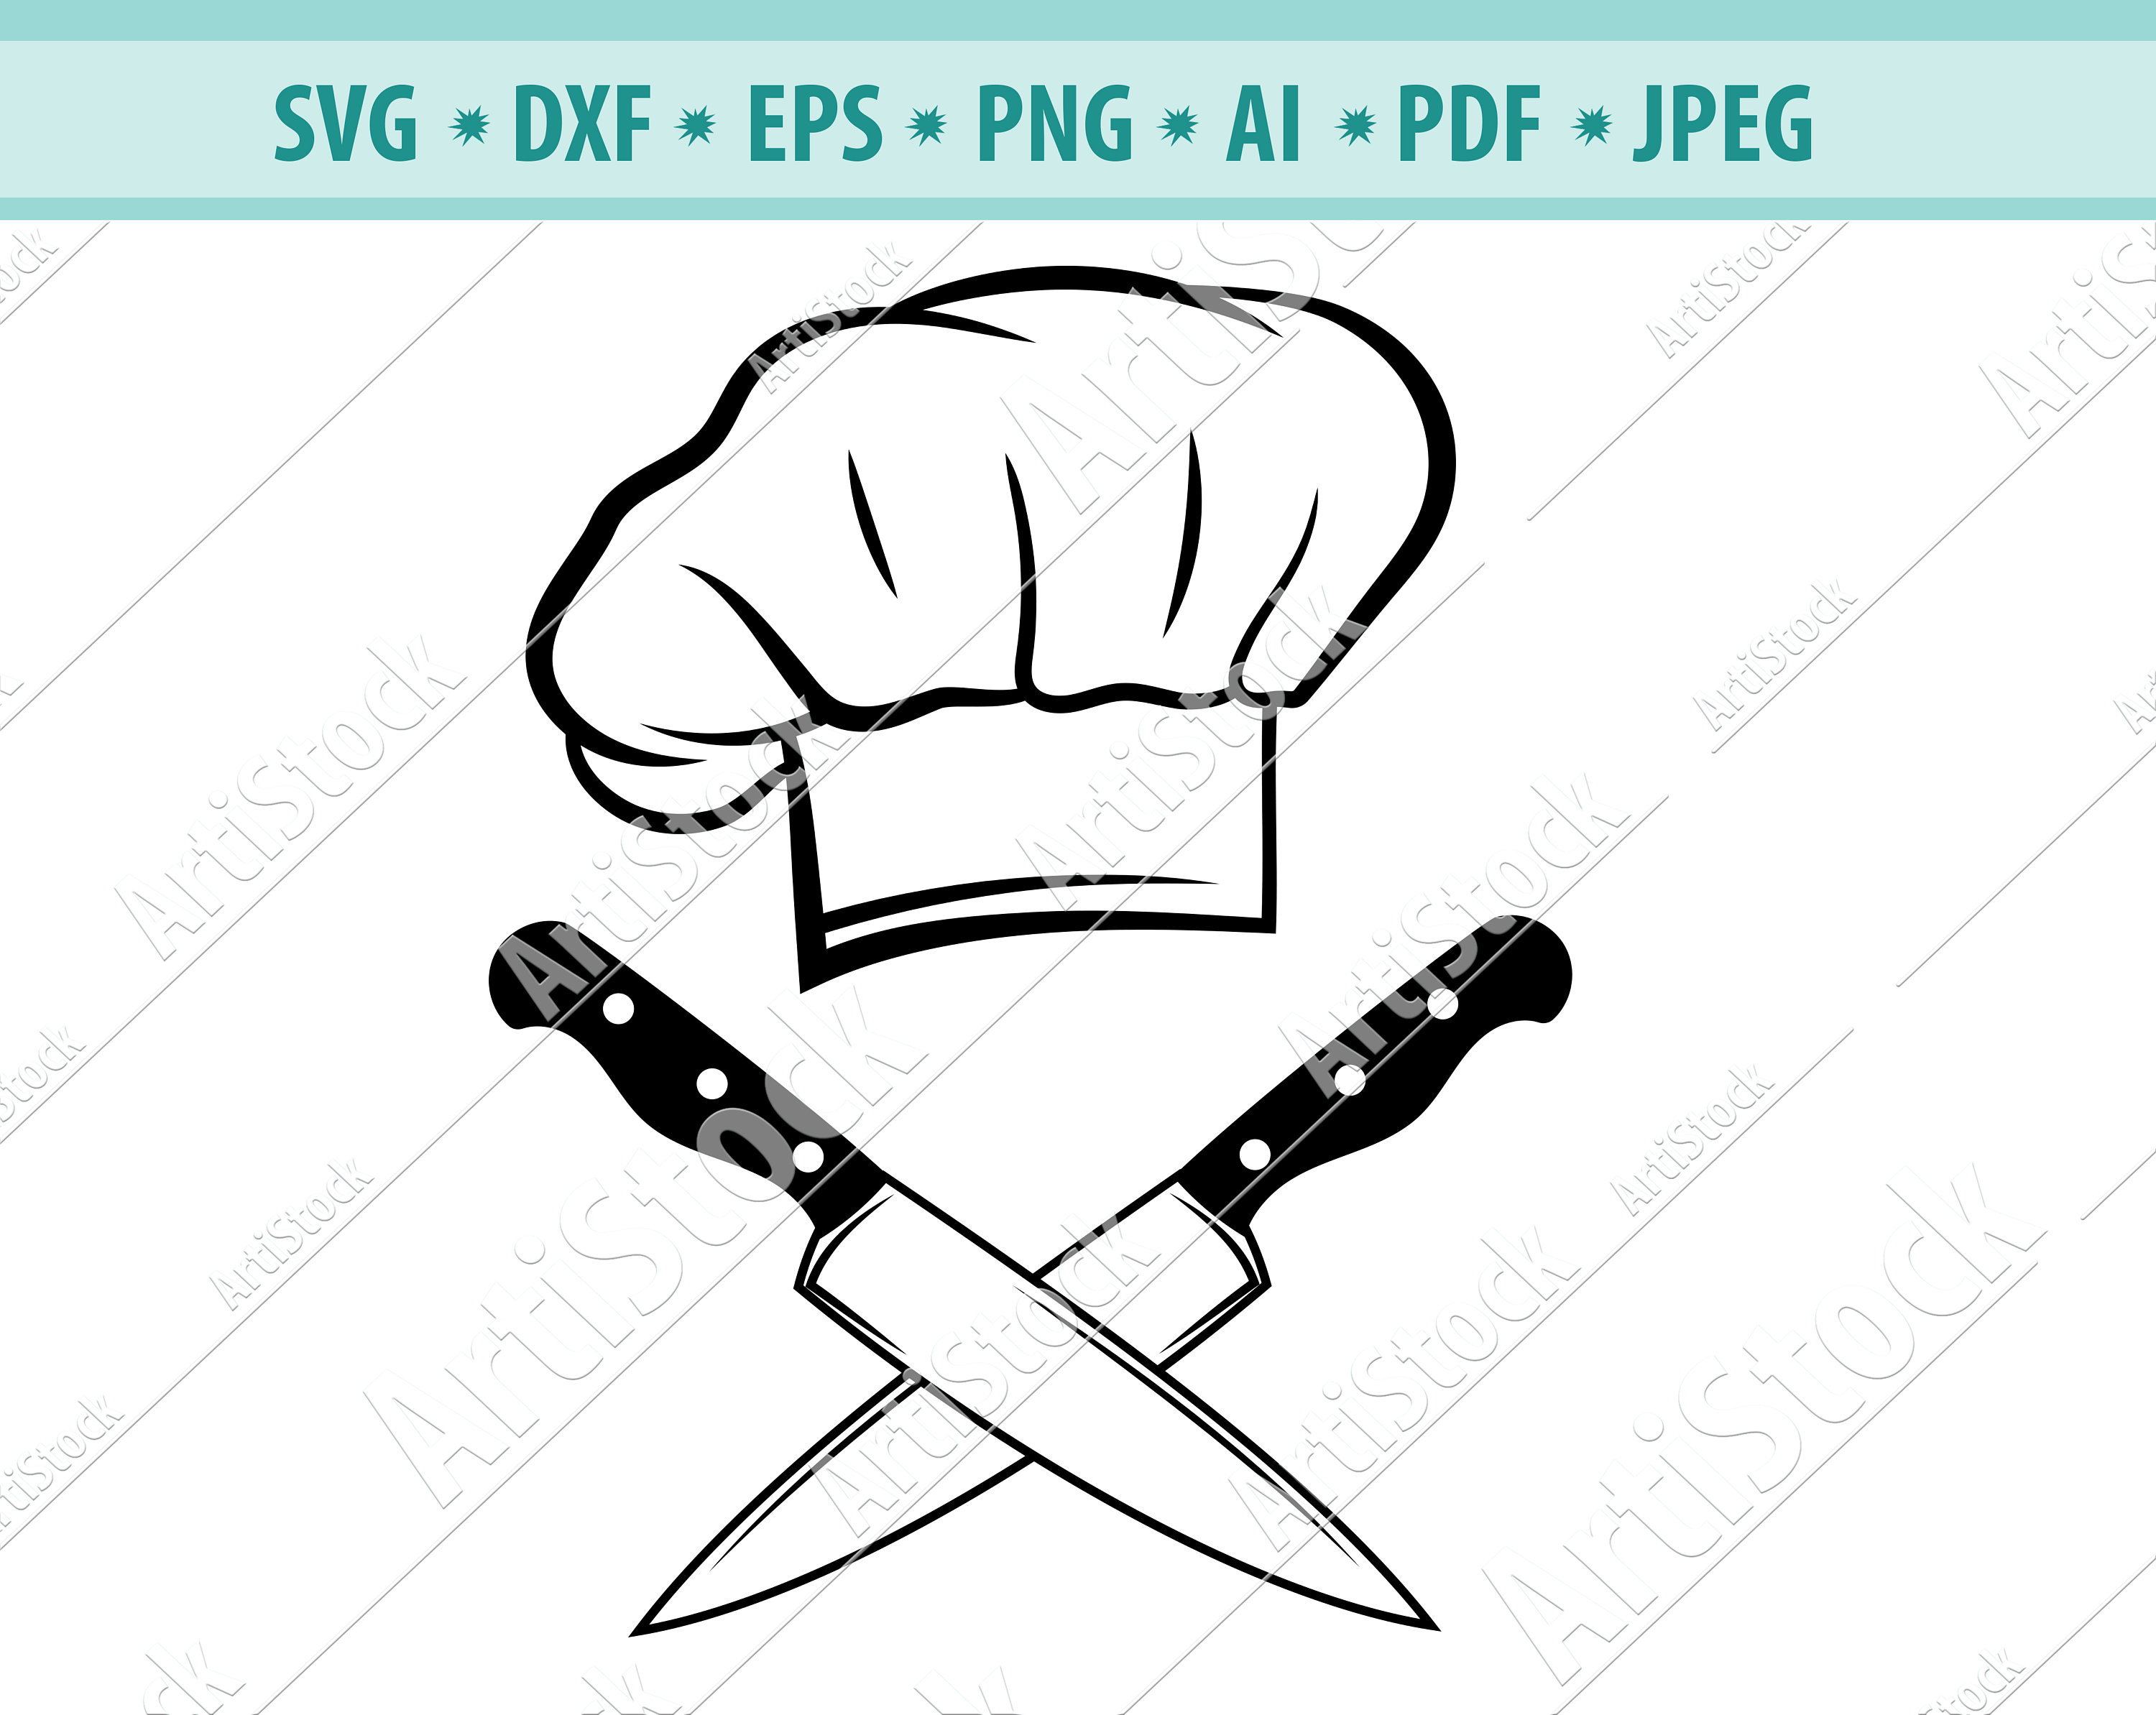 Sharp Knife For Chef Kitchen Tool For Cutting Meat Stock Illustration -  Download Image Now - iStock